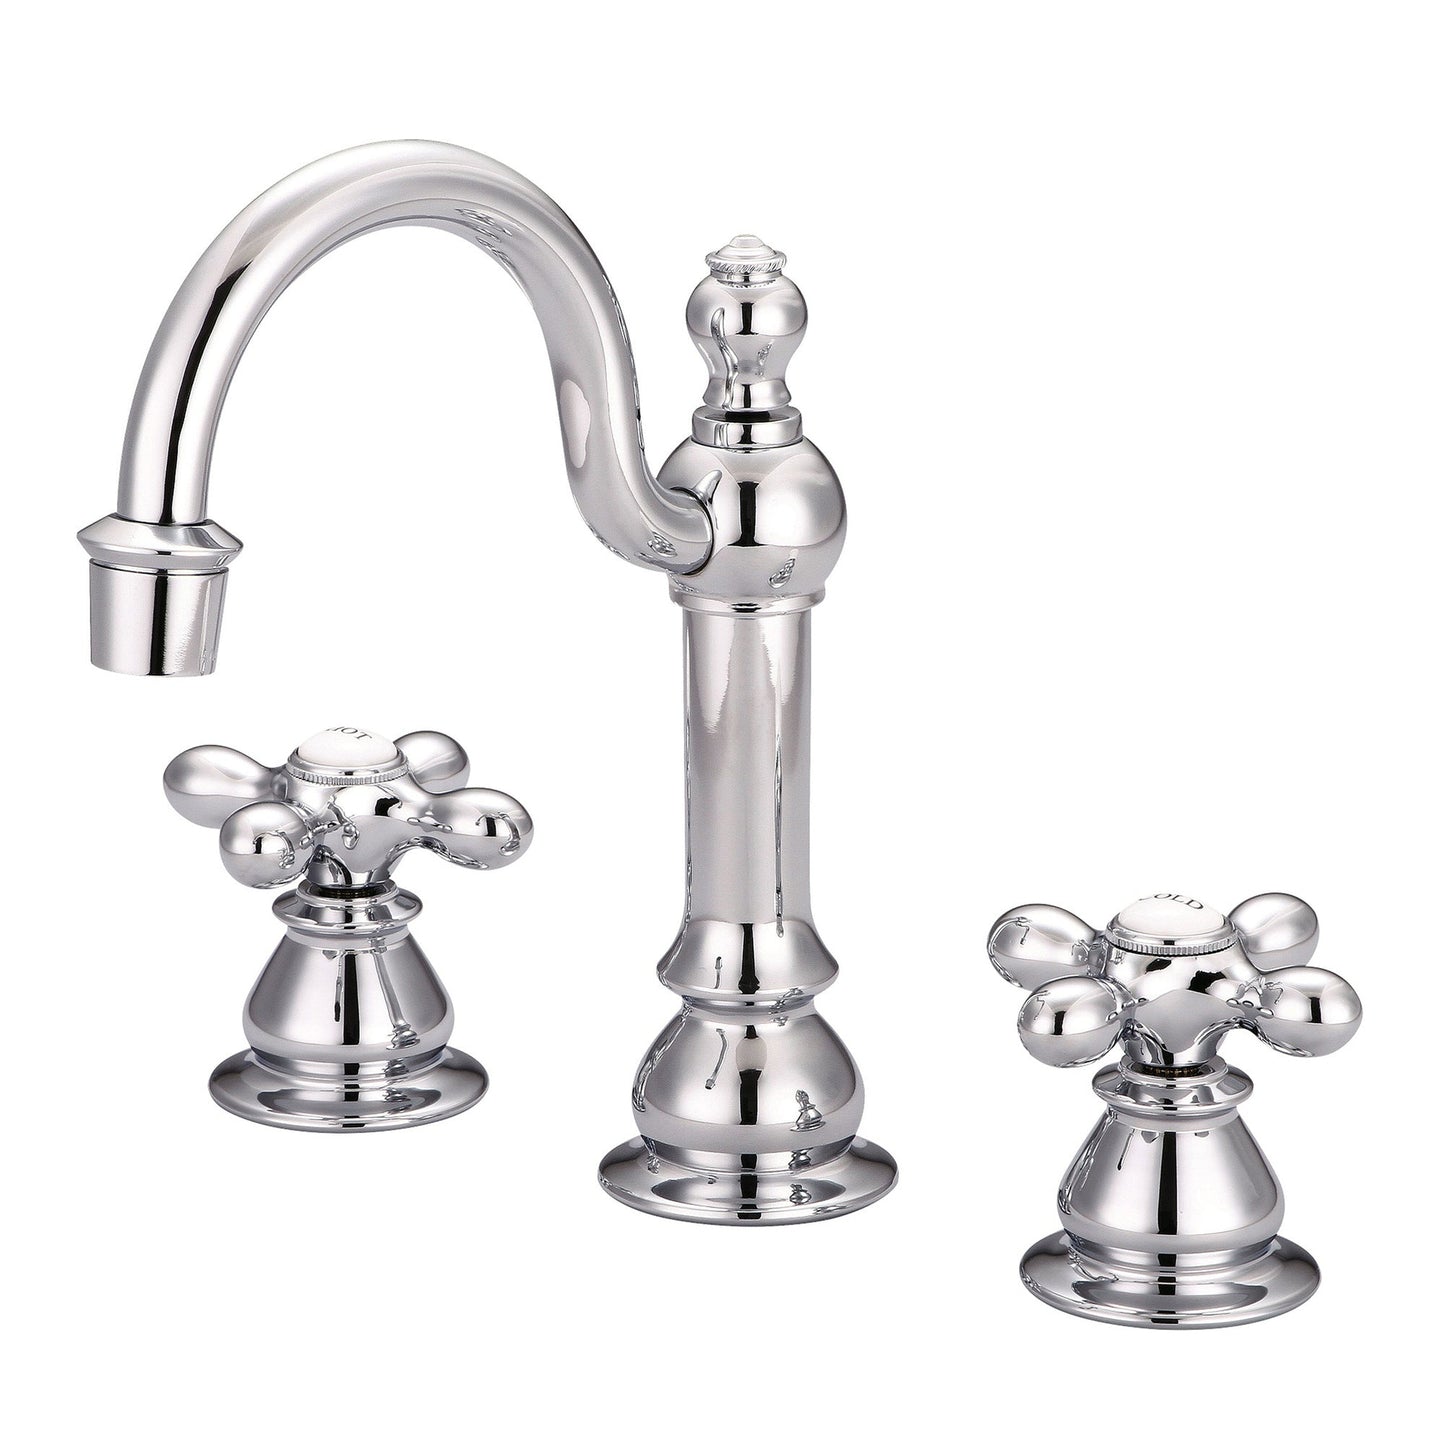 Water Creation American 20th Century Classic Widespread Lavatory F2-0012 8" Silver Solid Brass Faucet With Pop-Up Drain And Metal Cross Handles, Hot And Cold Labels Included